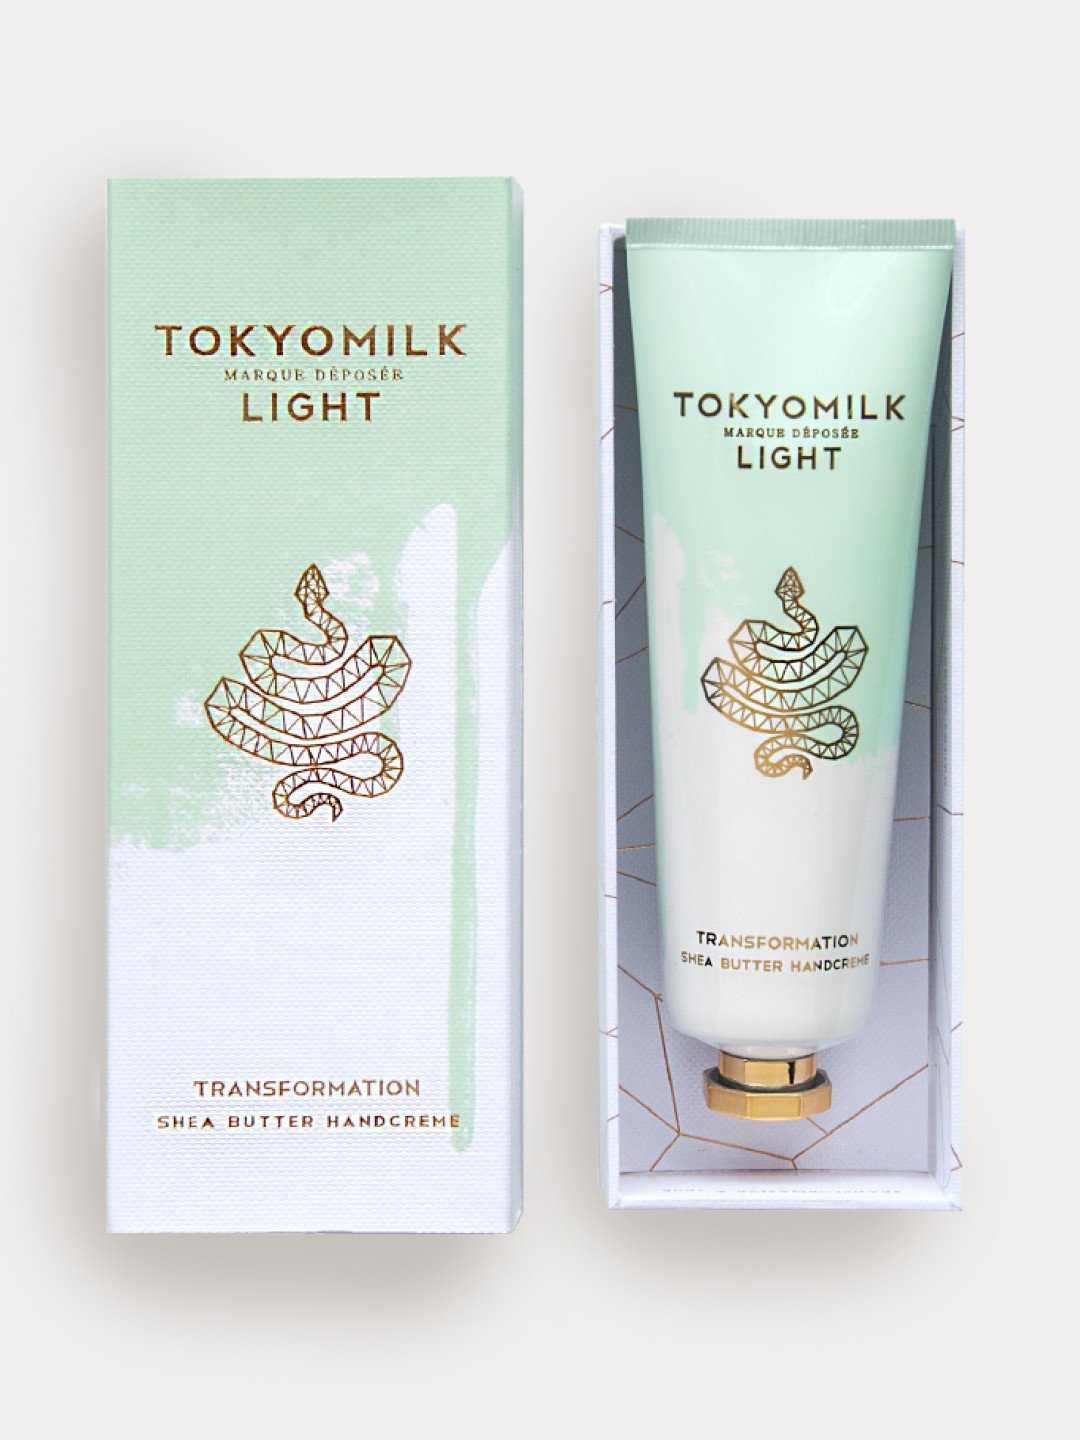 A tube of Margot Elena TokyoMilk Light Transformation No. 03 Shea Butter Handcreme next to its packaging, both decorated with a minimalist white and gold origami boat design on a light green background infused with the scent of